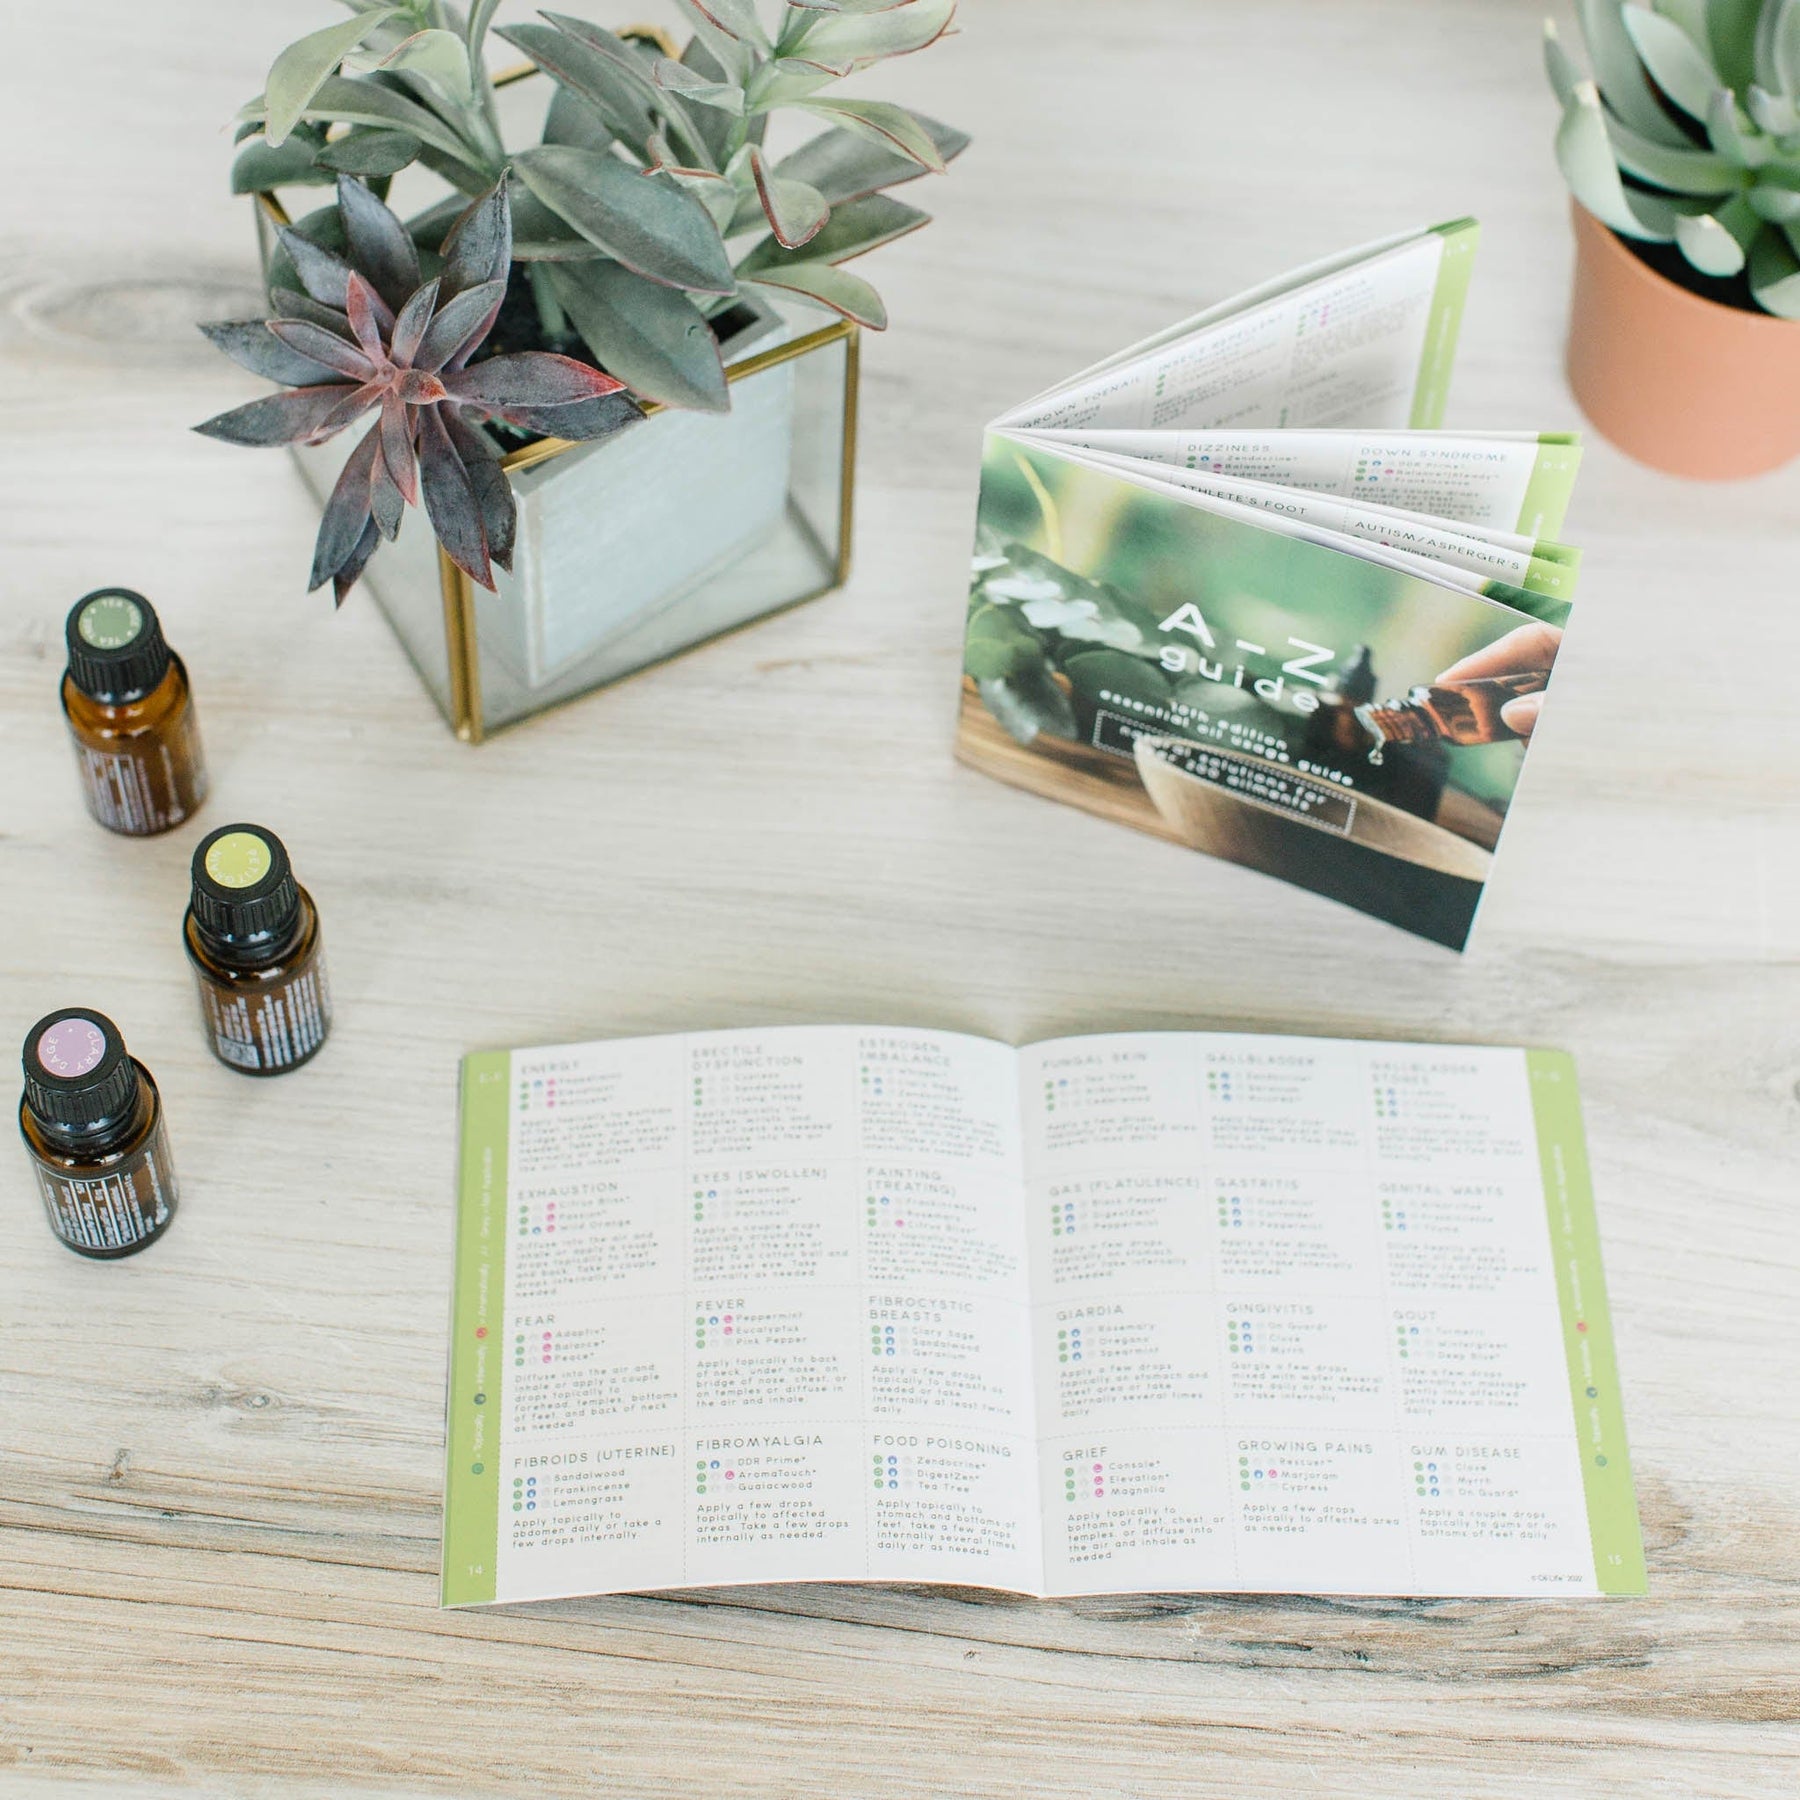 doTERRA: Essential Oil Usage Guide A-Z